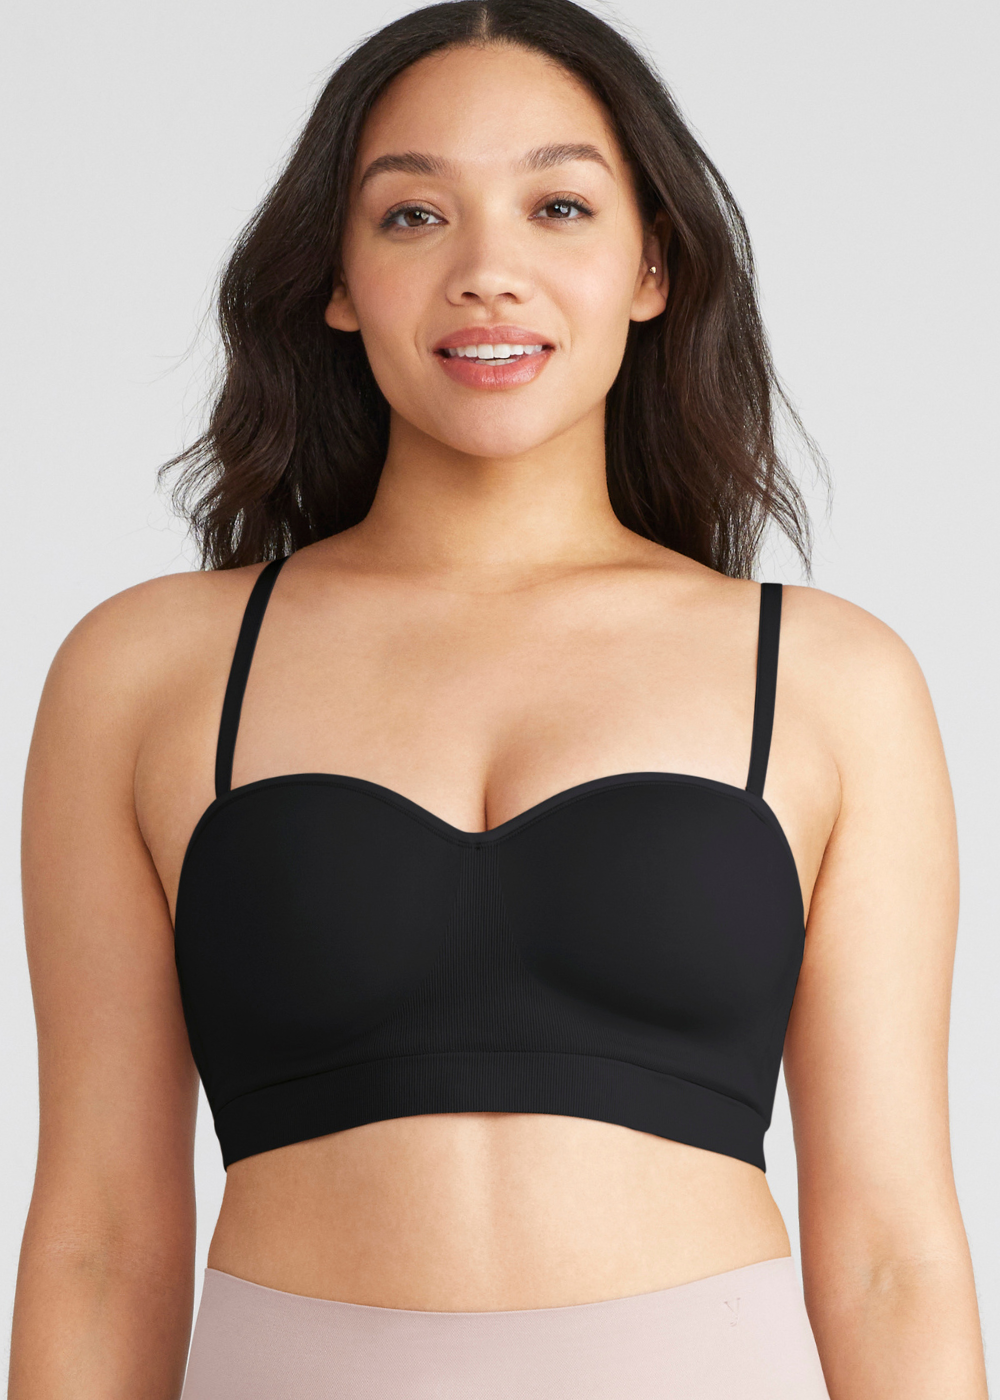 Yummie Convertible Bralette, Black, Size L/XL, from Soma